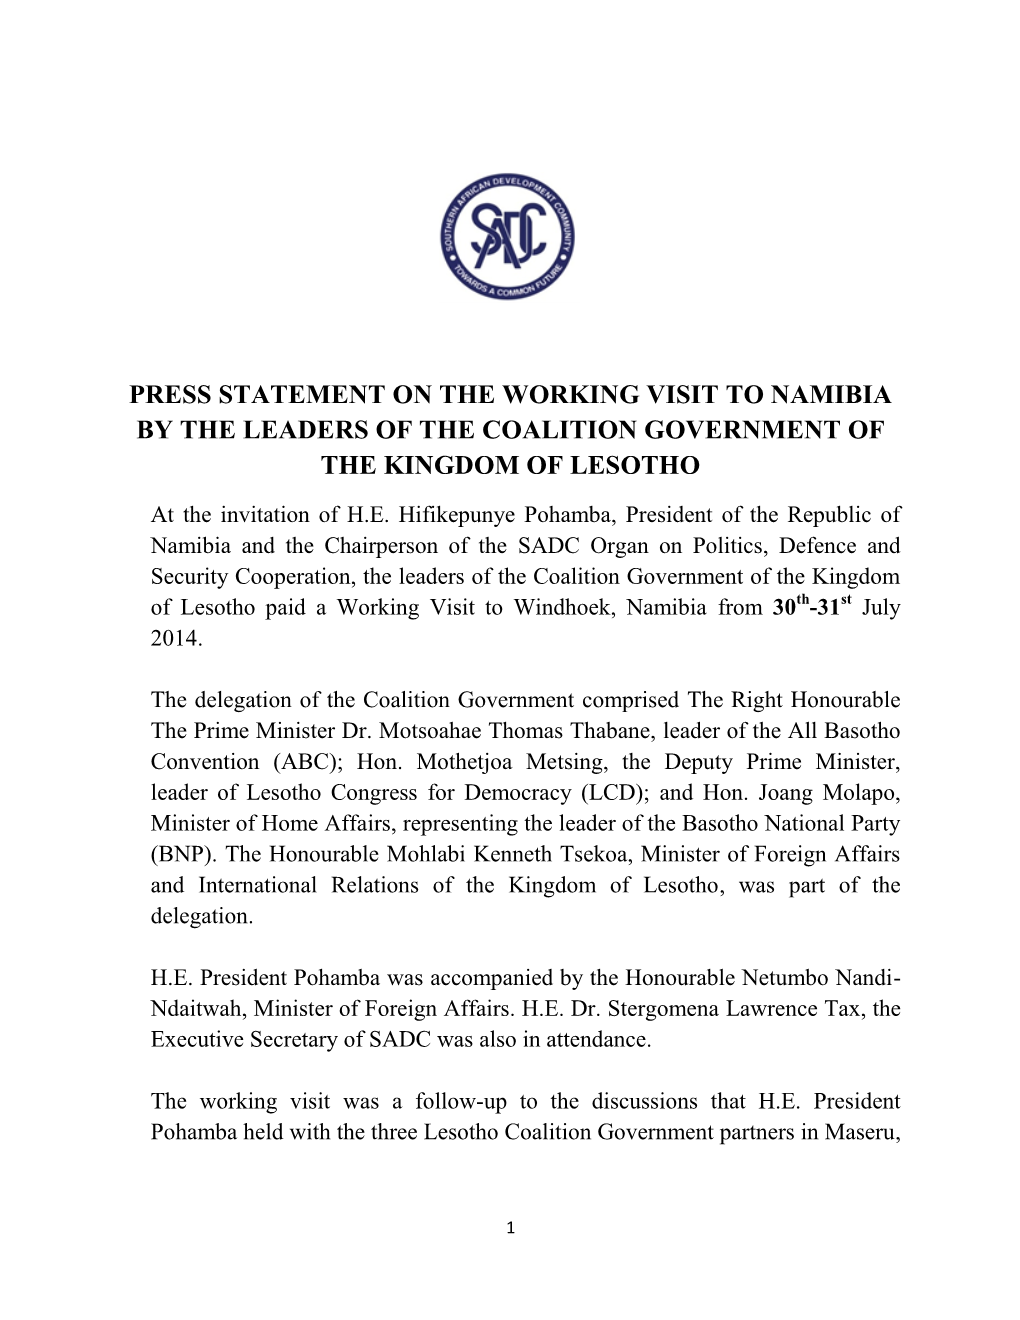 Press Statement on the Working Visit to Namibia by the Leaders of the Coalition Government of the Kingdom of Lesotho